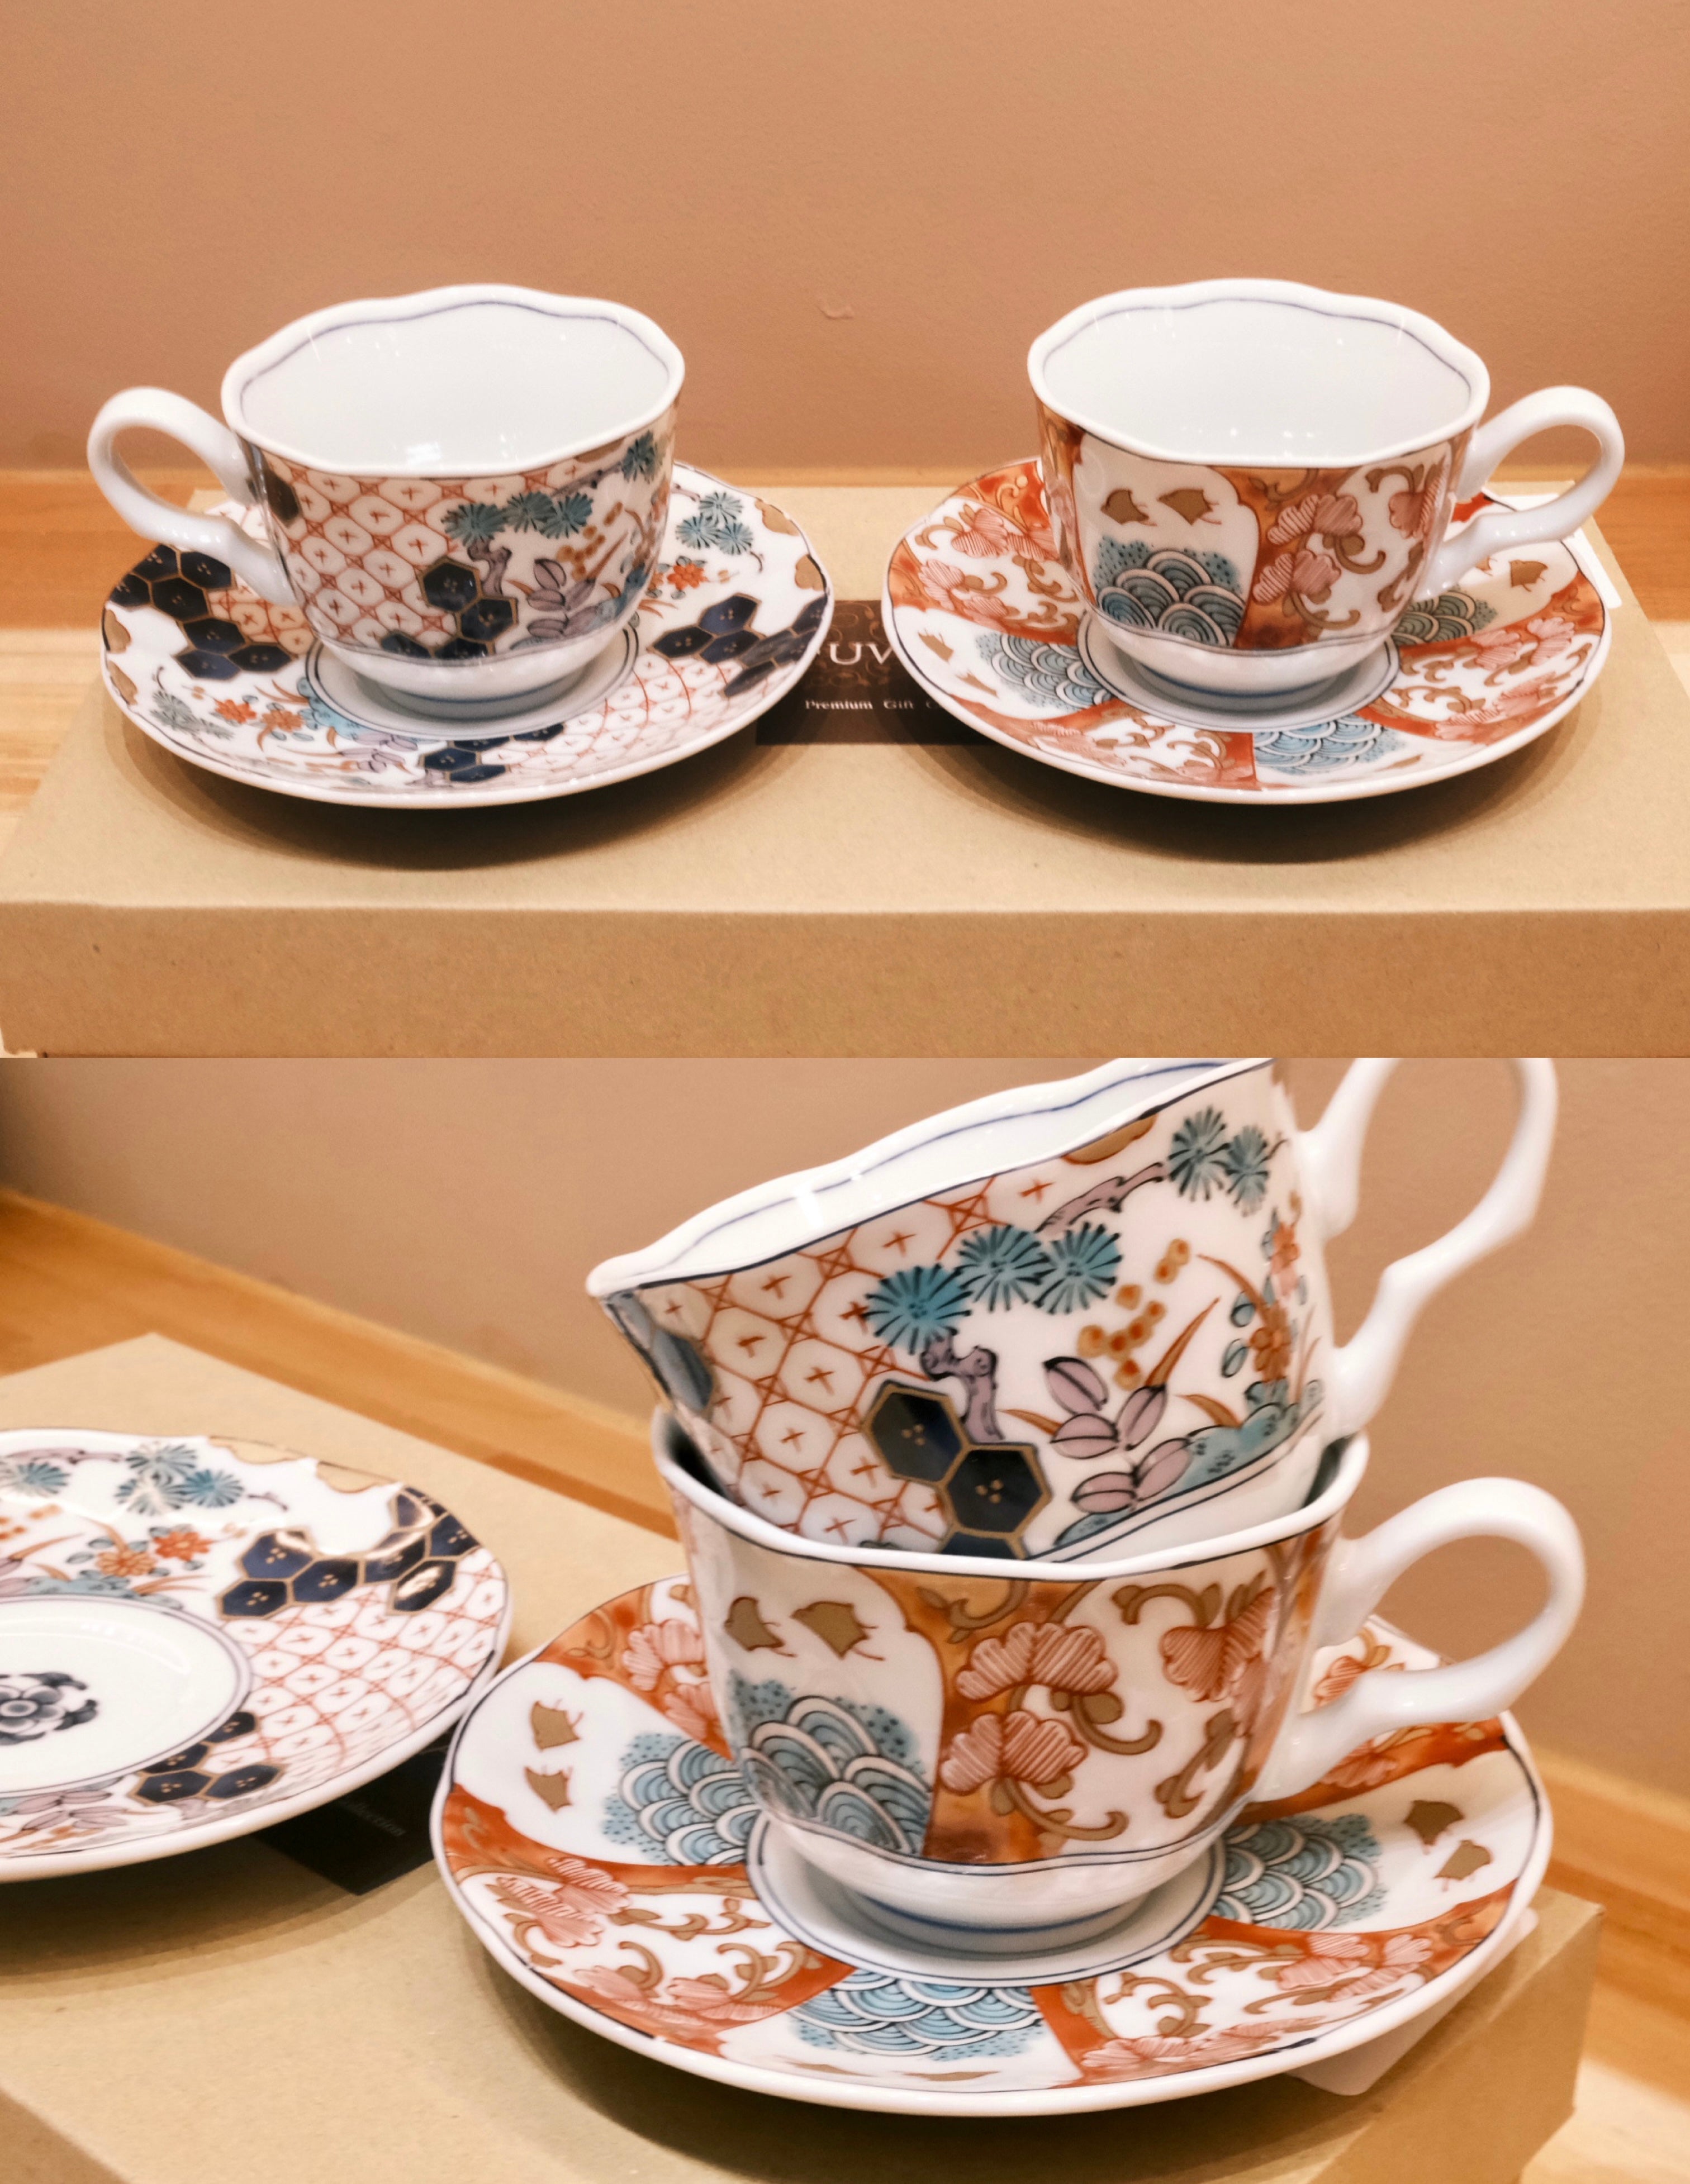 Buy LLDAYU Vintage Style Ceramic Tea Cup Set , gift box packaging 8 Ounces  Exquisite With Embossed Pattern Design Coffee Mug Tea Cups Set , for Women  Momï¼Ë†redï¼â€° Online at Low Prices